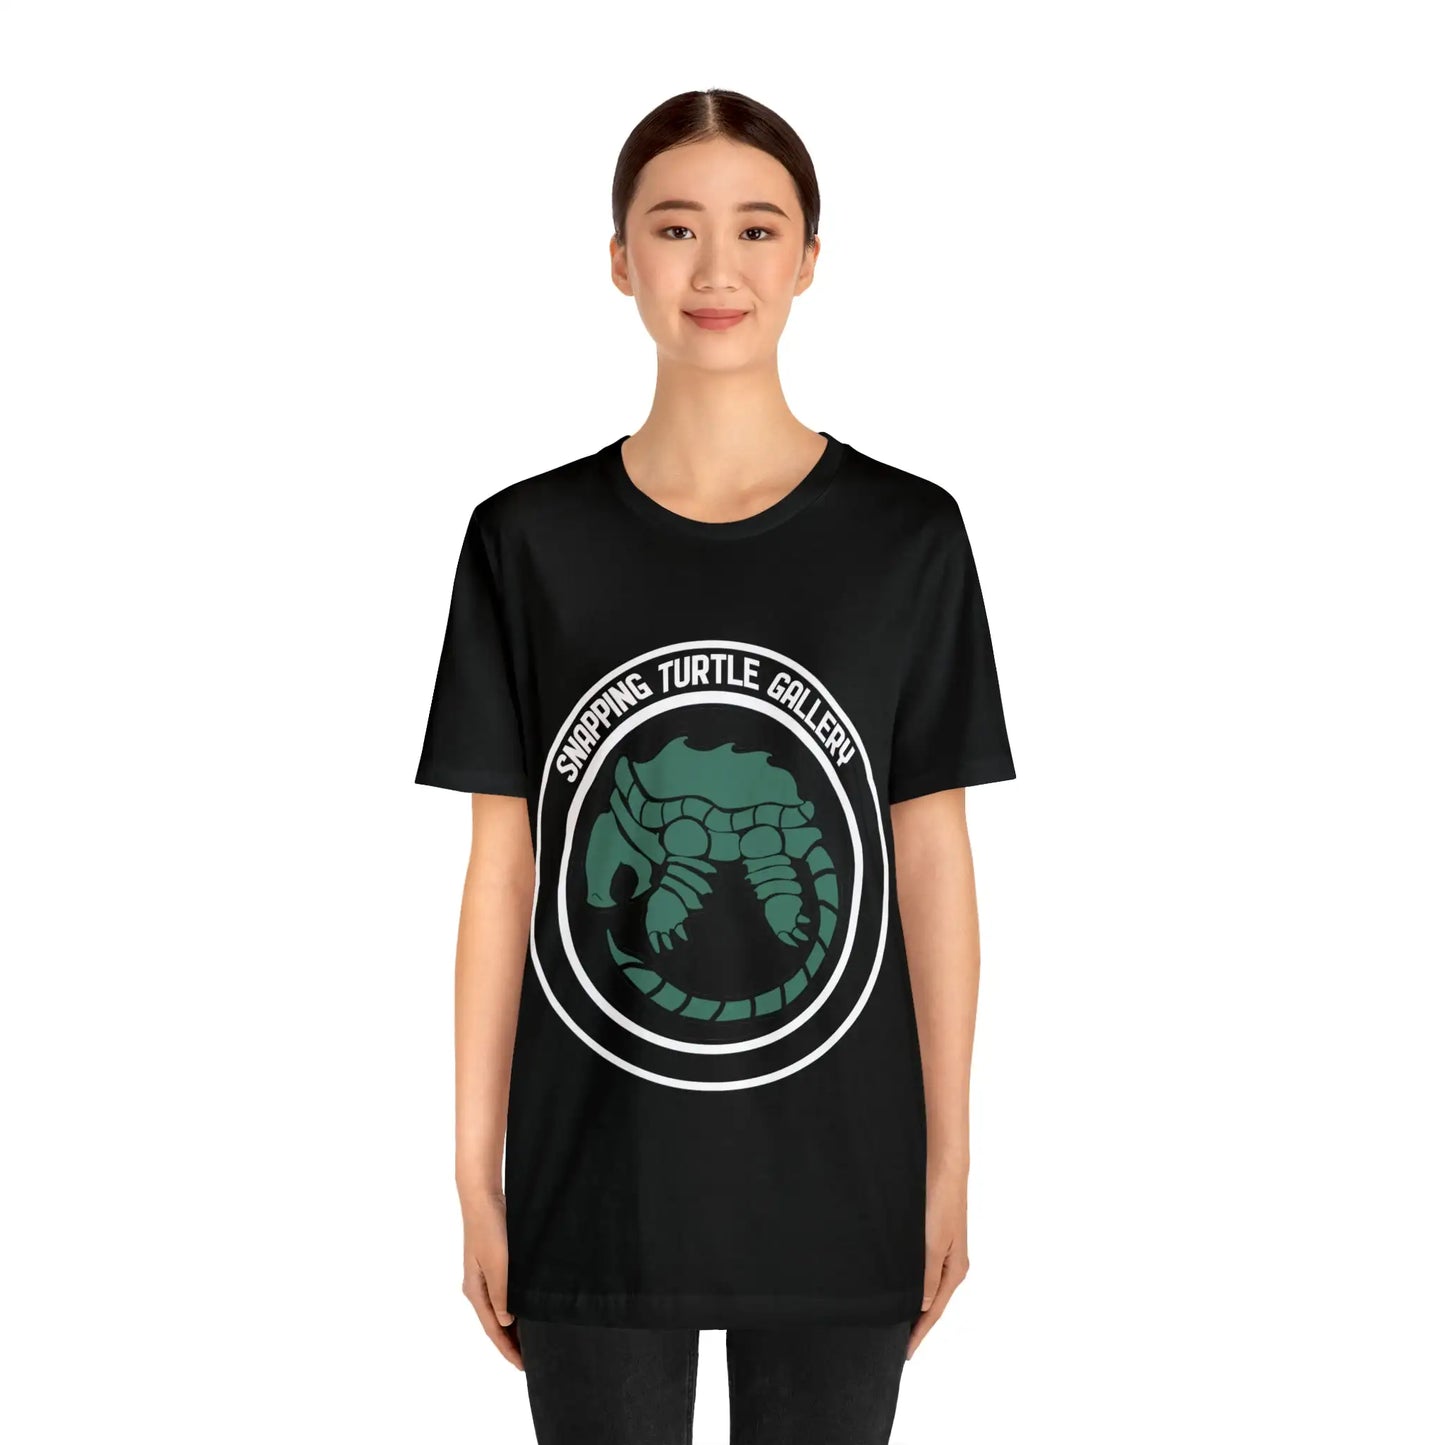 Snapping Turtle gallery Logo Shirt 4